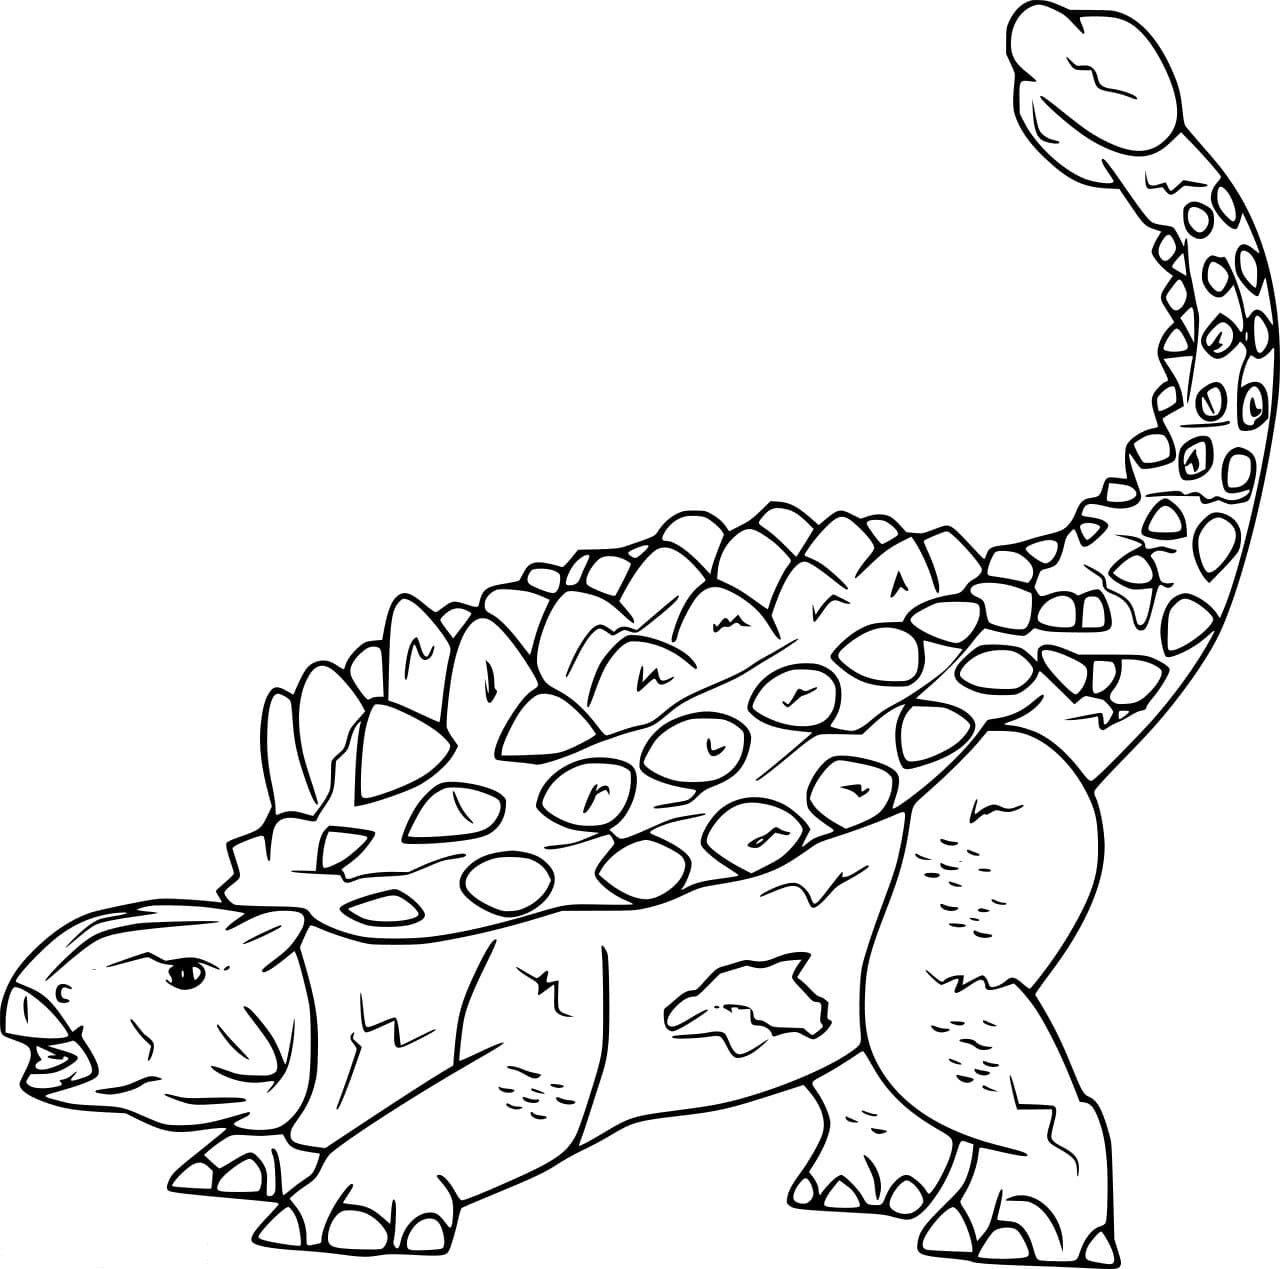 Crichtonsaurus Is A Genus Of Ankylosaurid Dinosaur That Originated From Late Cretaceous Asia Coloring Pages